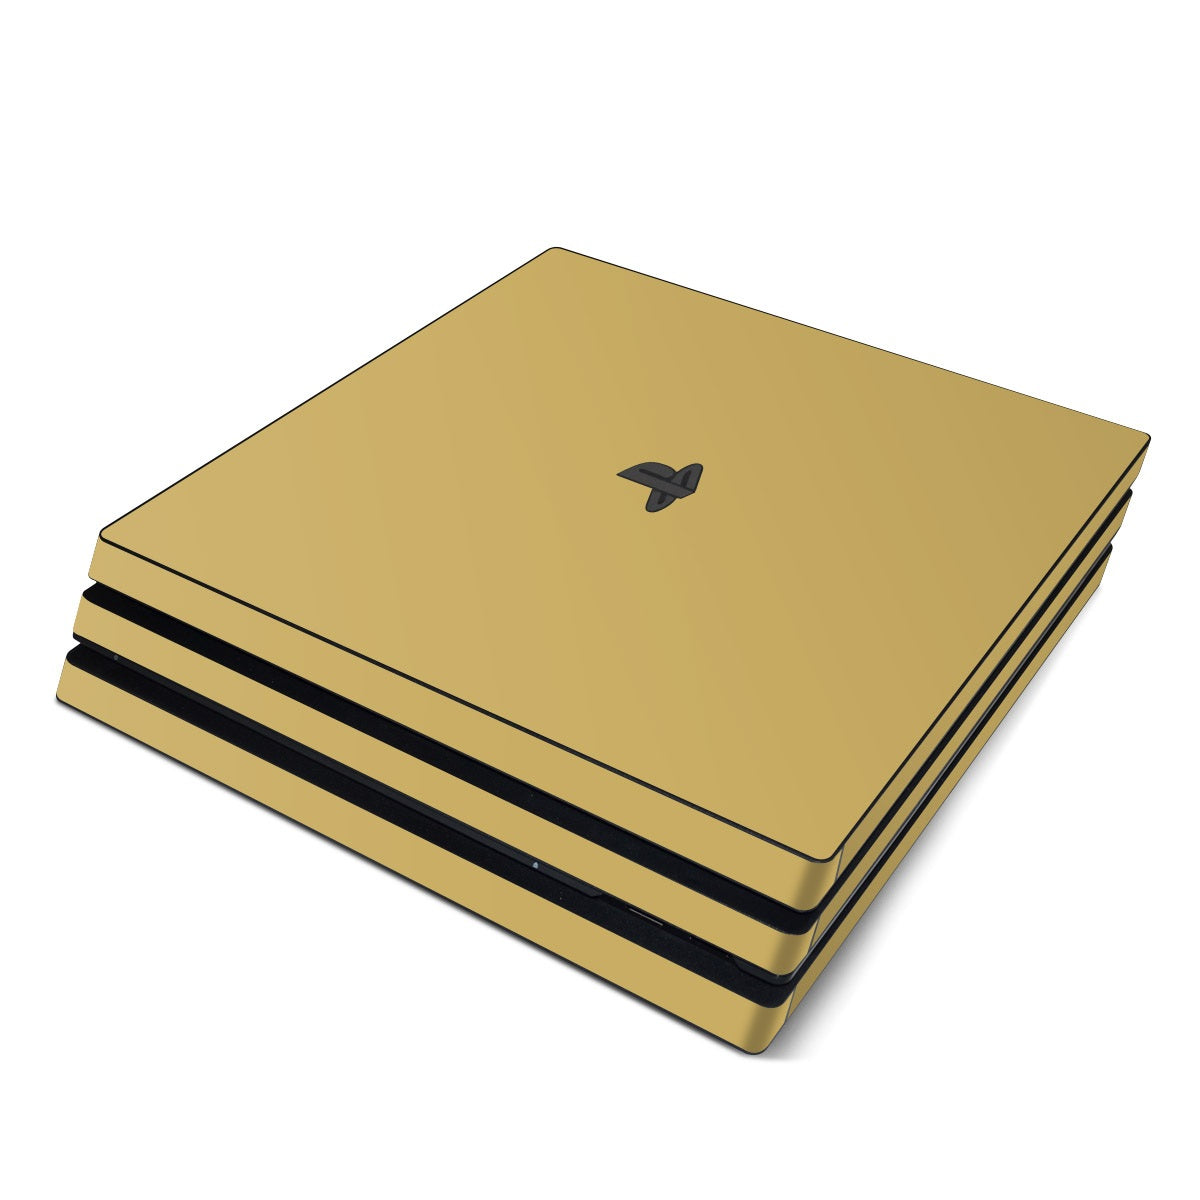 Solid State Mustard - Sony PS4 Pro Skin